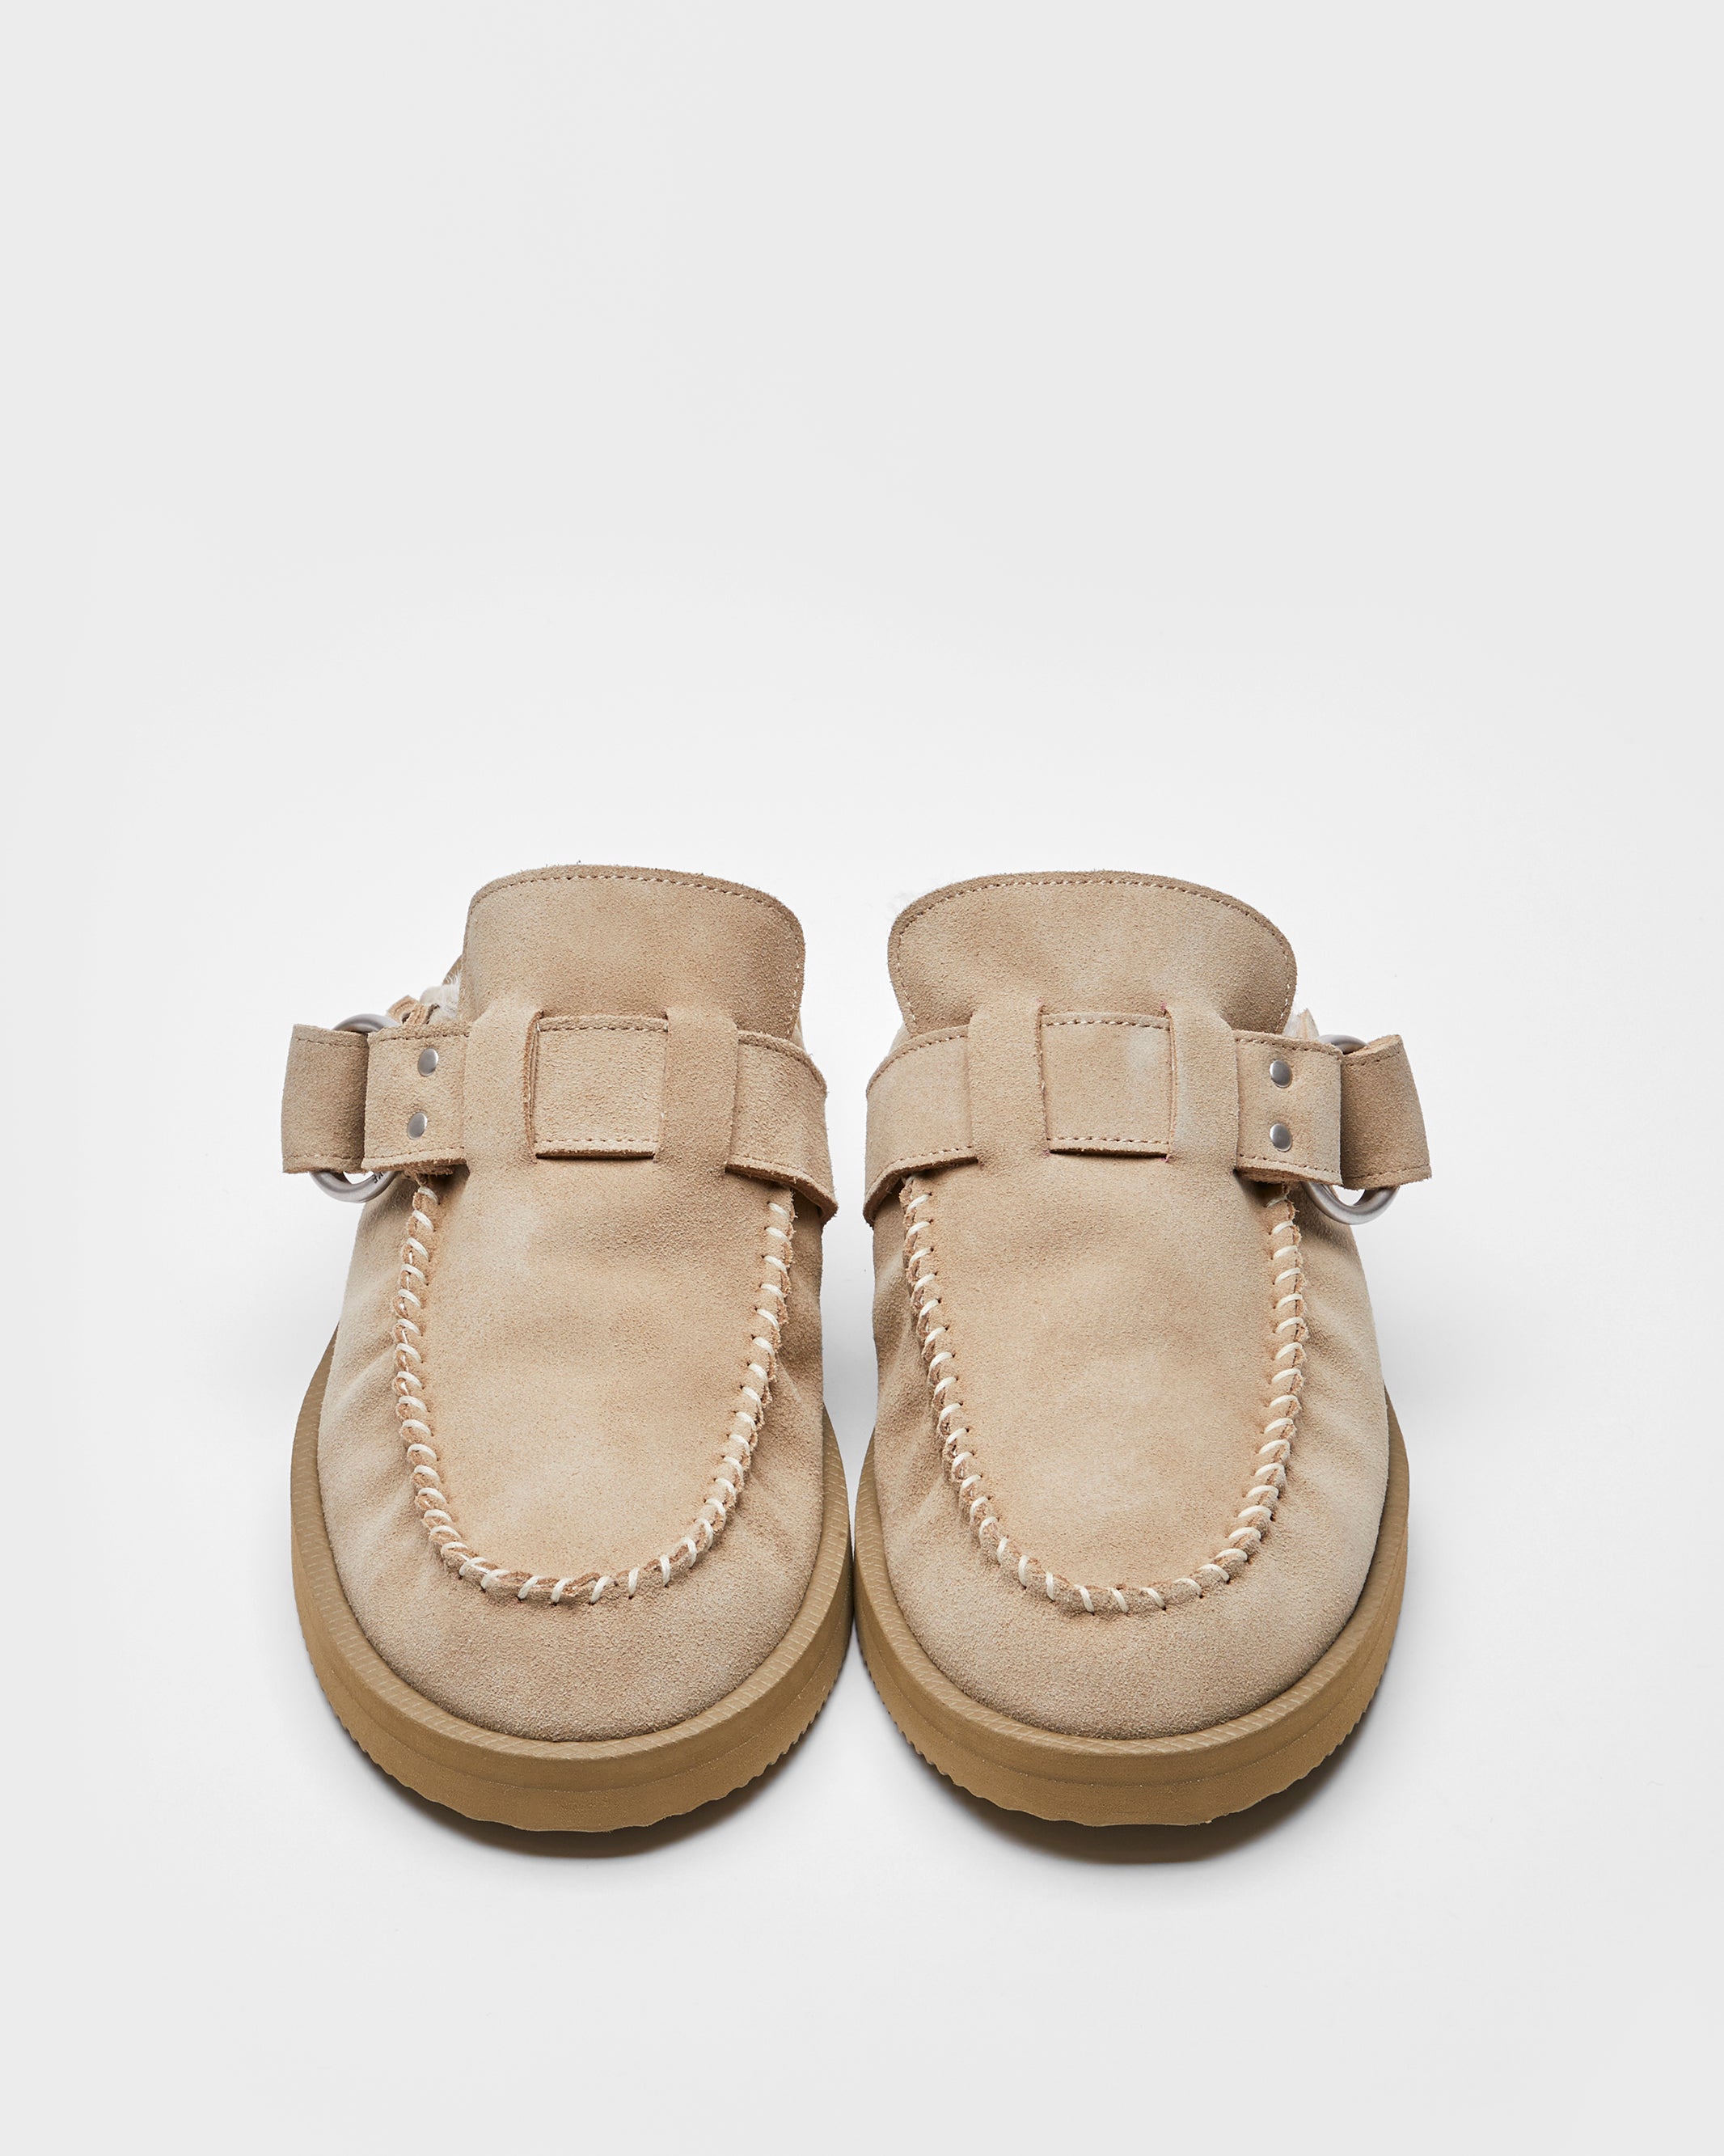 SUICOKE LEMI-Mab in Taupe OG-324MAB | Shop from eightywingold an official brand partner for SUICOKE Canada and US.